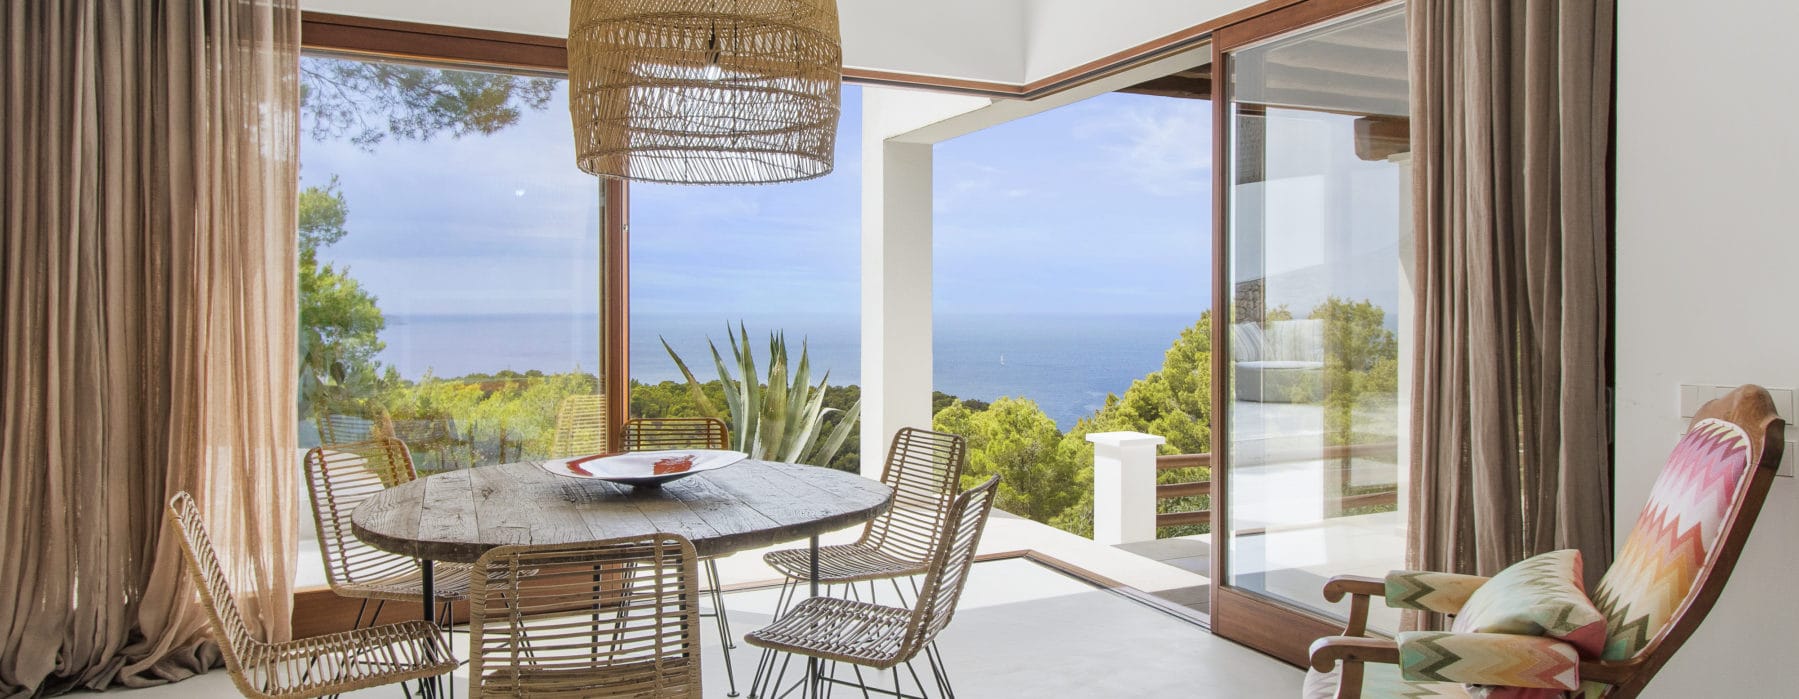 Dining corner with glass front and sea views